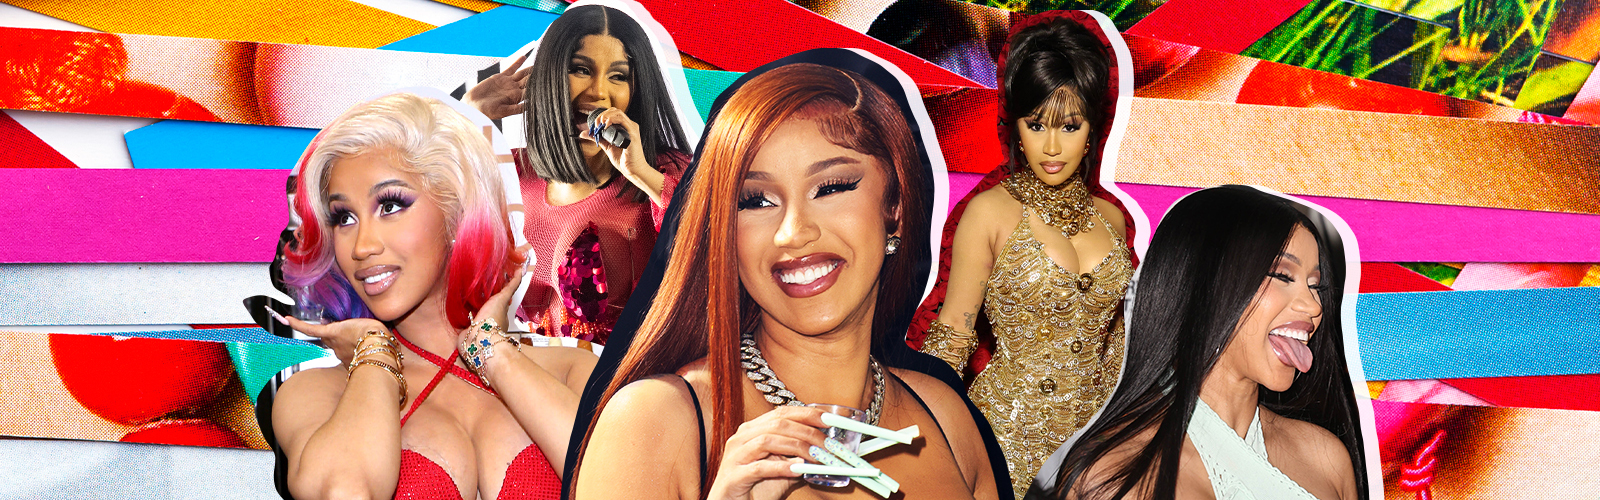 Here's What You Need to Know About Cardi B's Rise to Fame